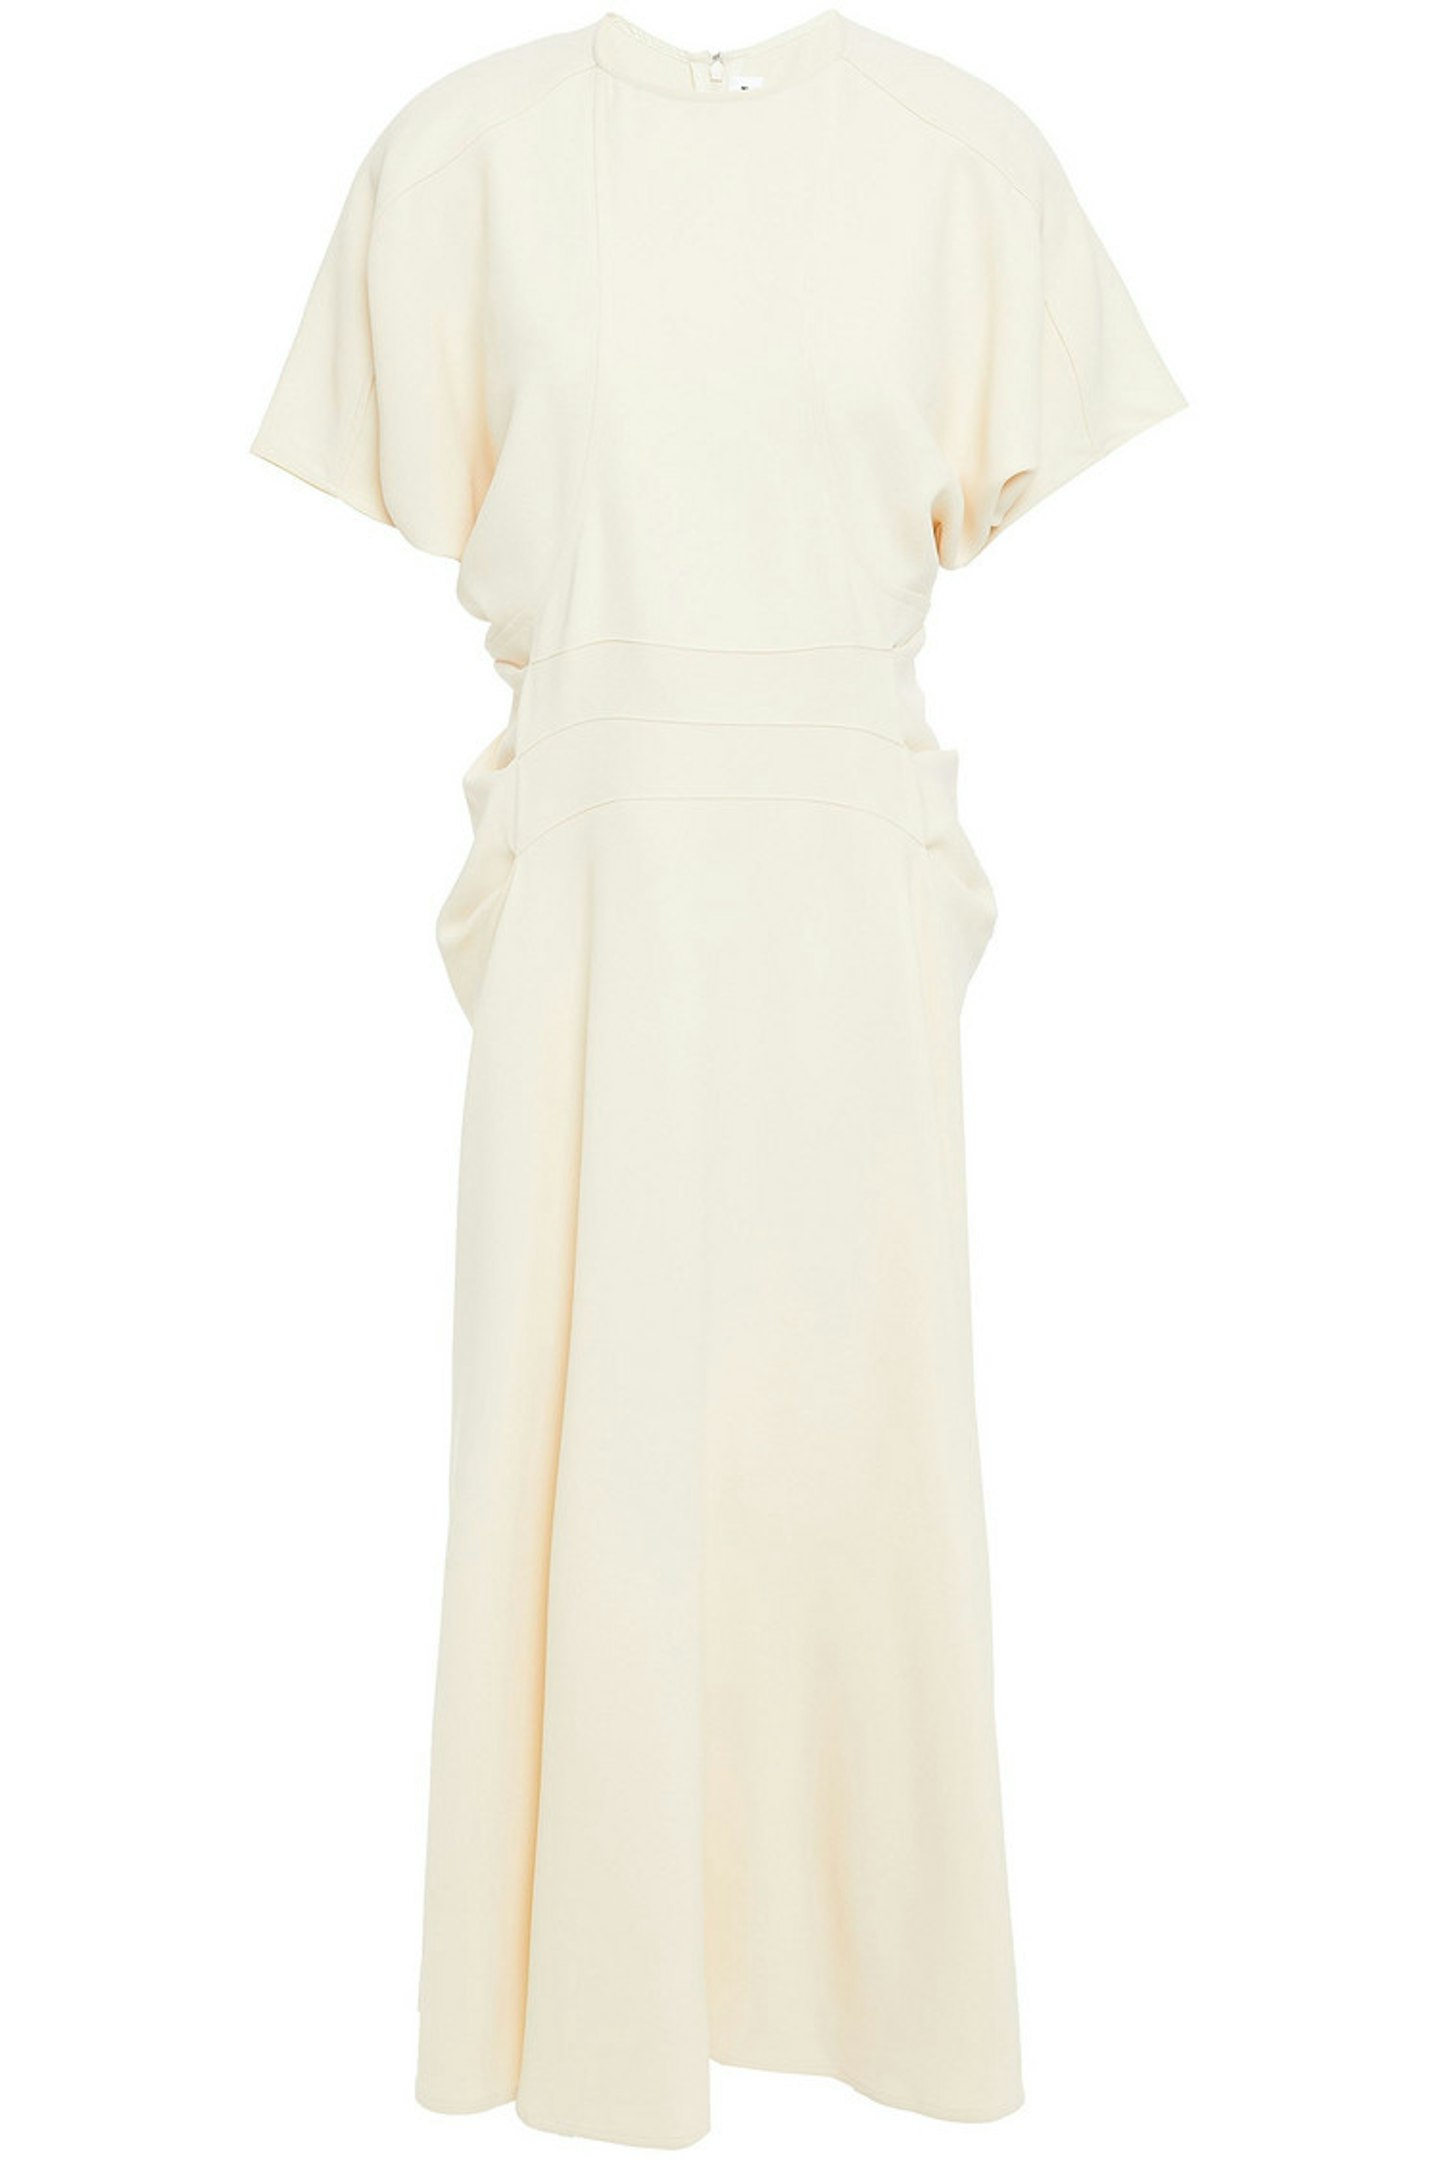 Victoria Beckham at The Outnet, Pleated stretch-crepe midi dress, £475